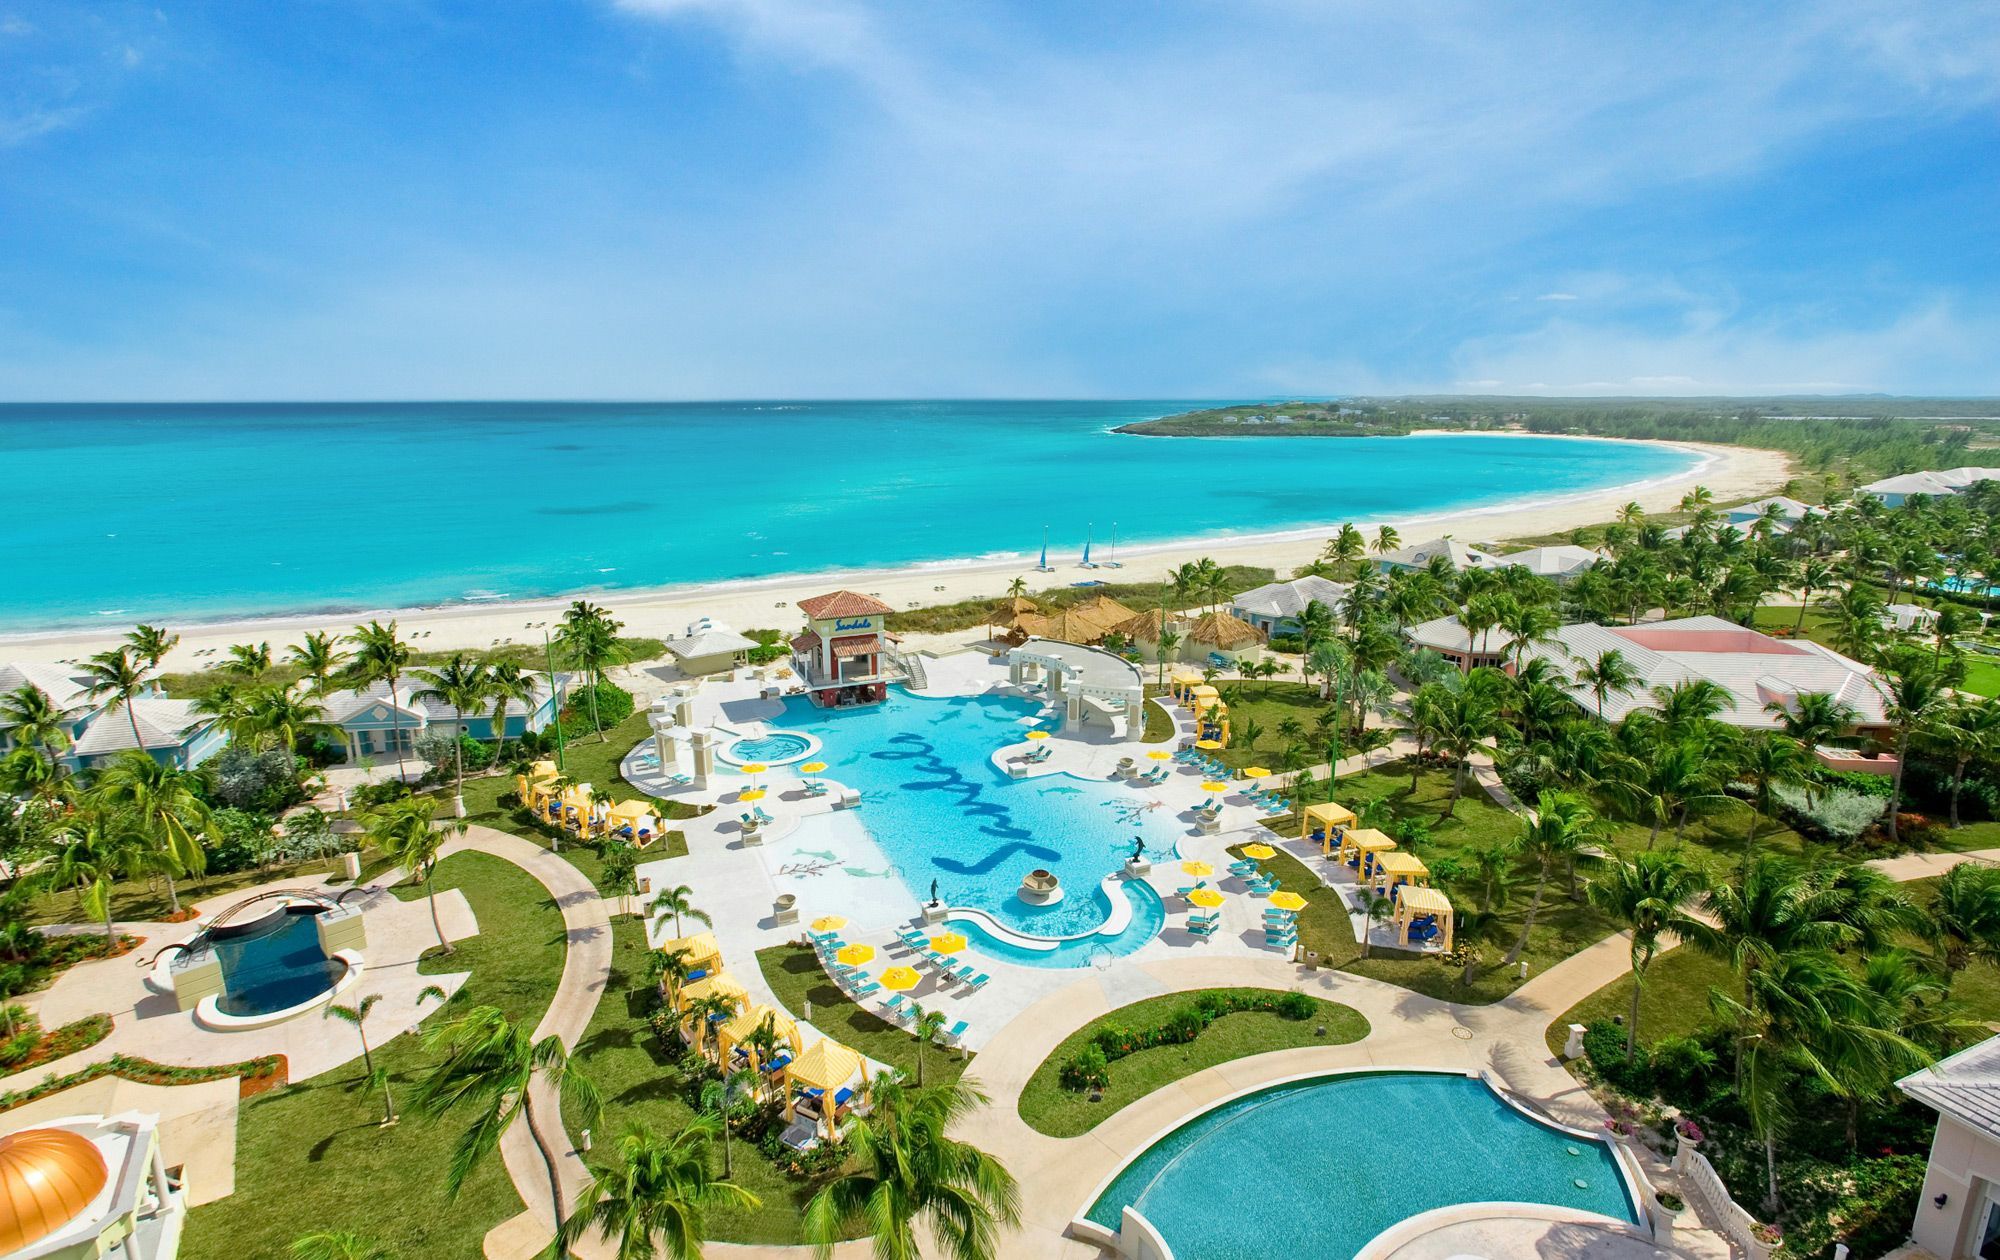 10 Best Sandals Resorts Ranked for 2022